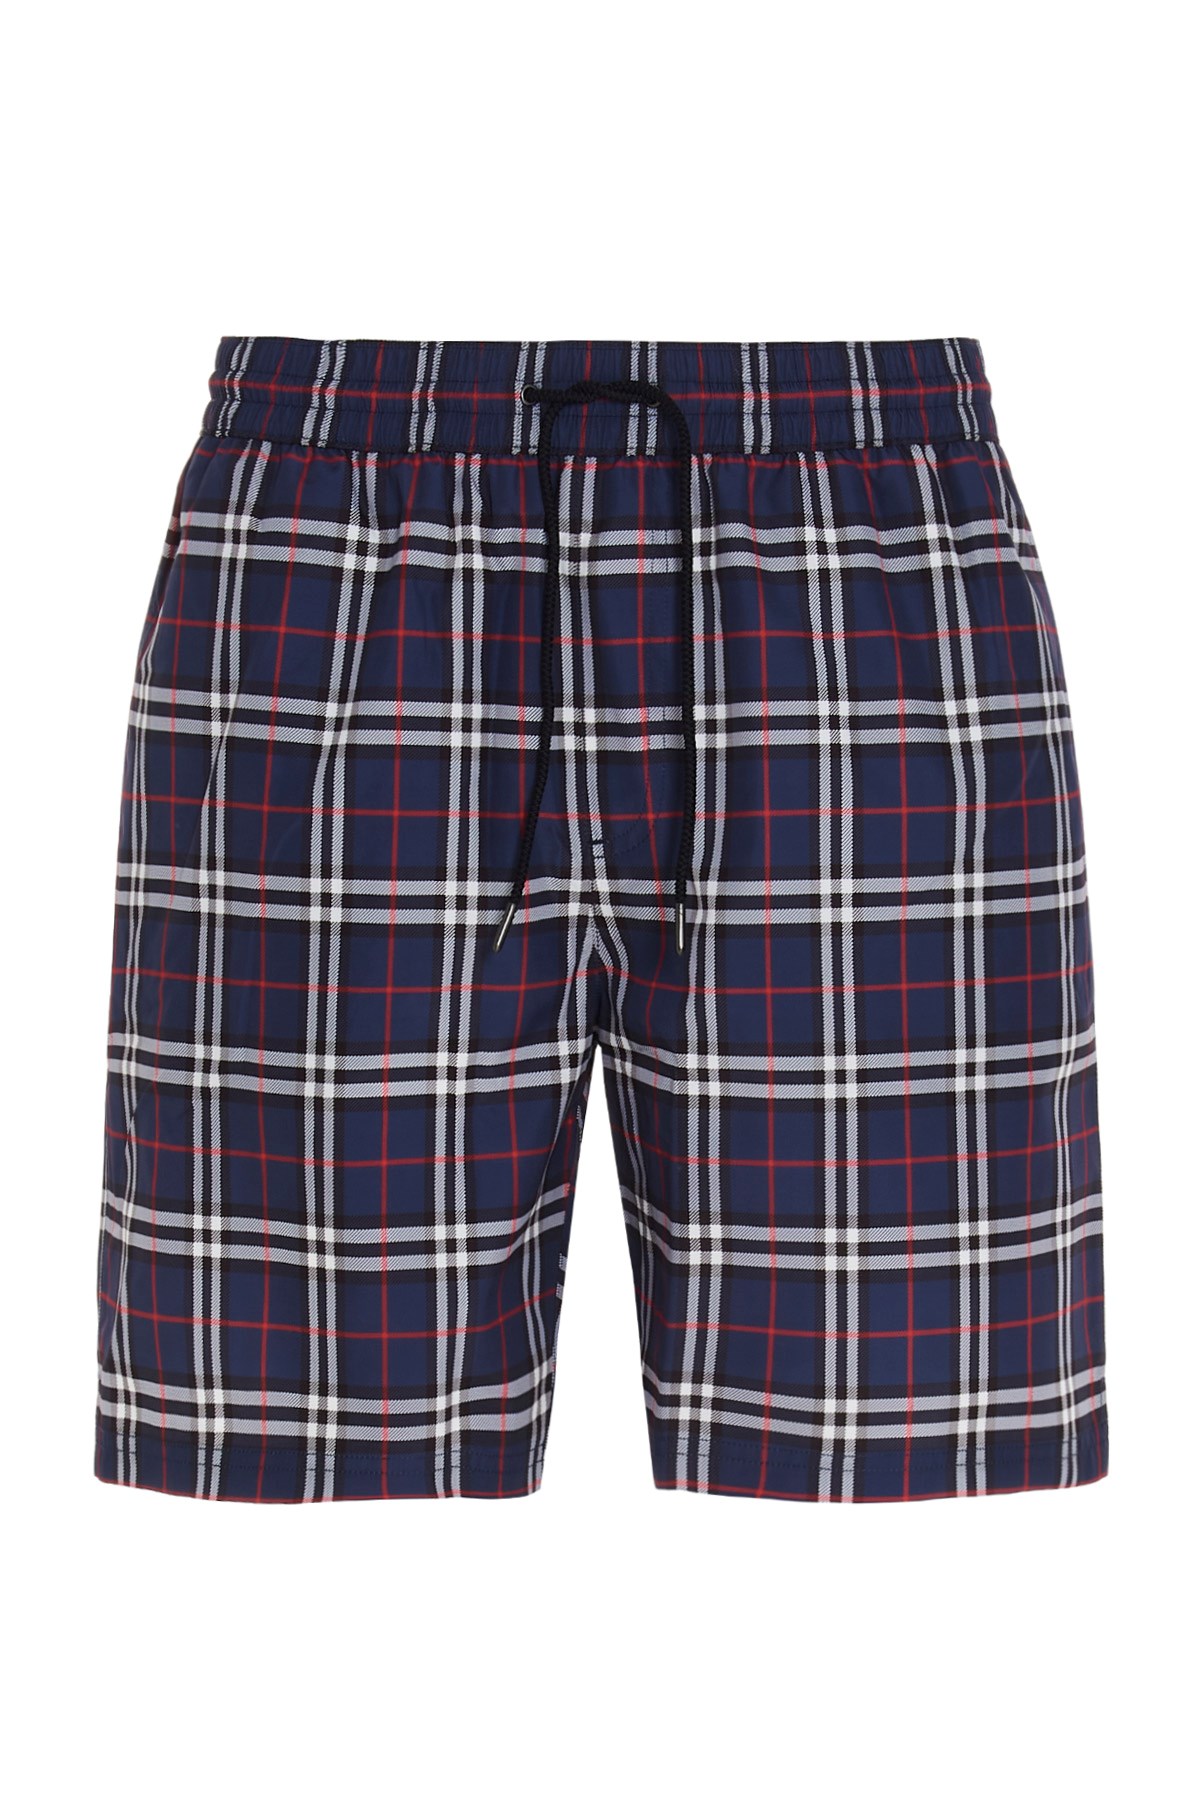 BURBERRY 'Guildes’ Swimming Shorts